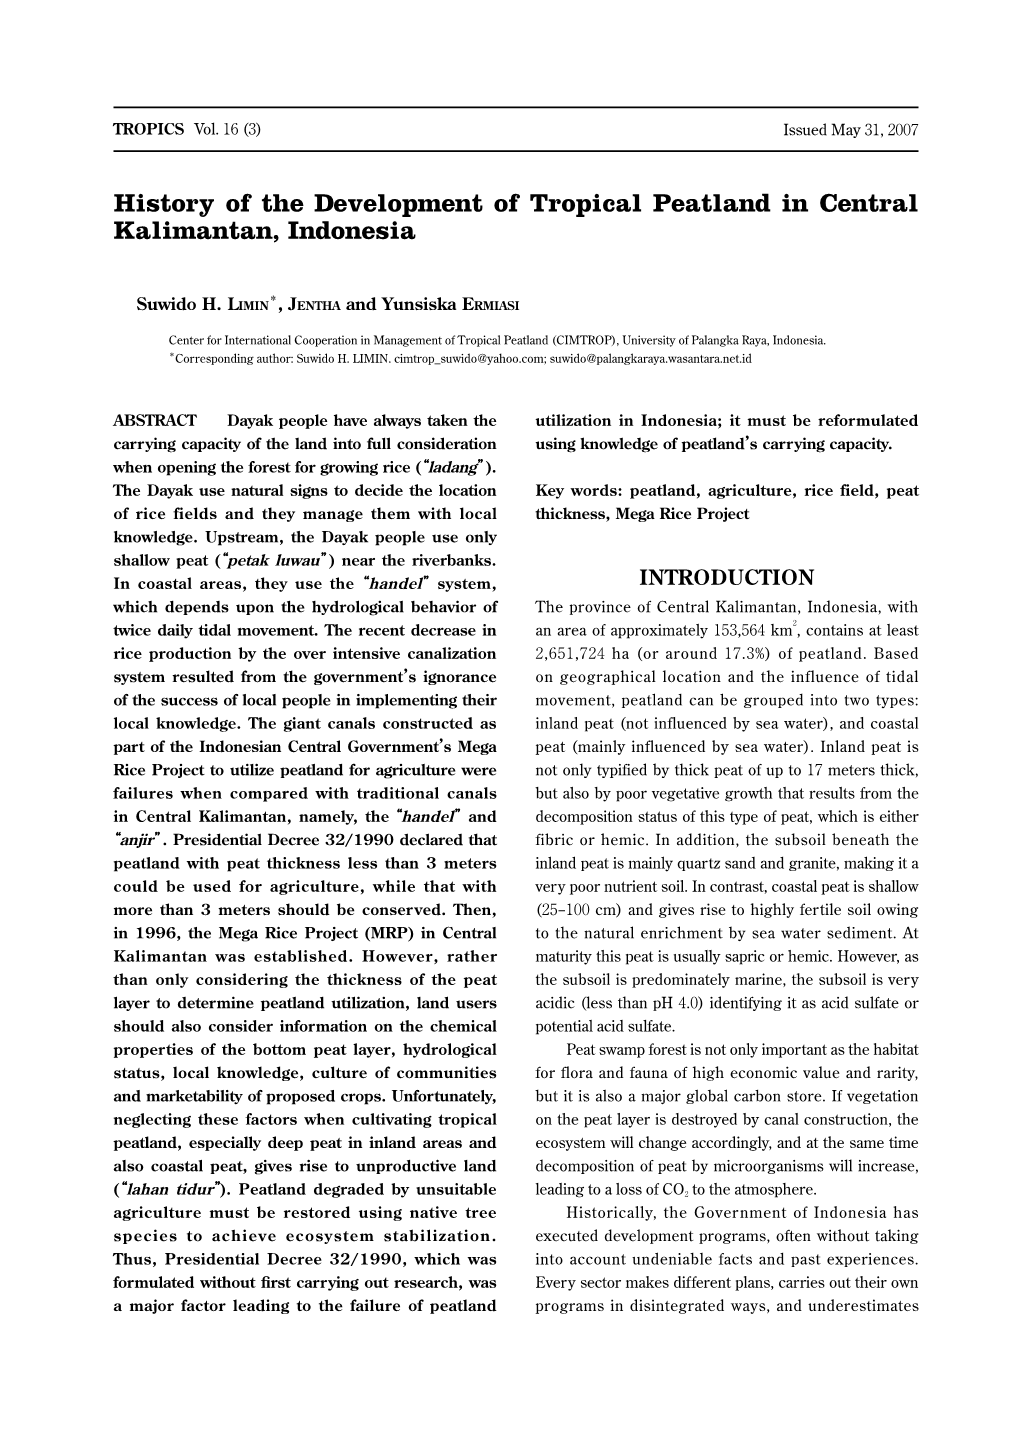 History of the Development of Tropical Peatland in Central Kalimantan, Indonesia